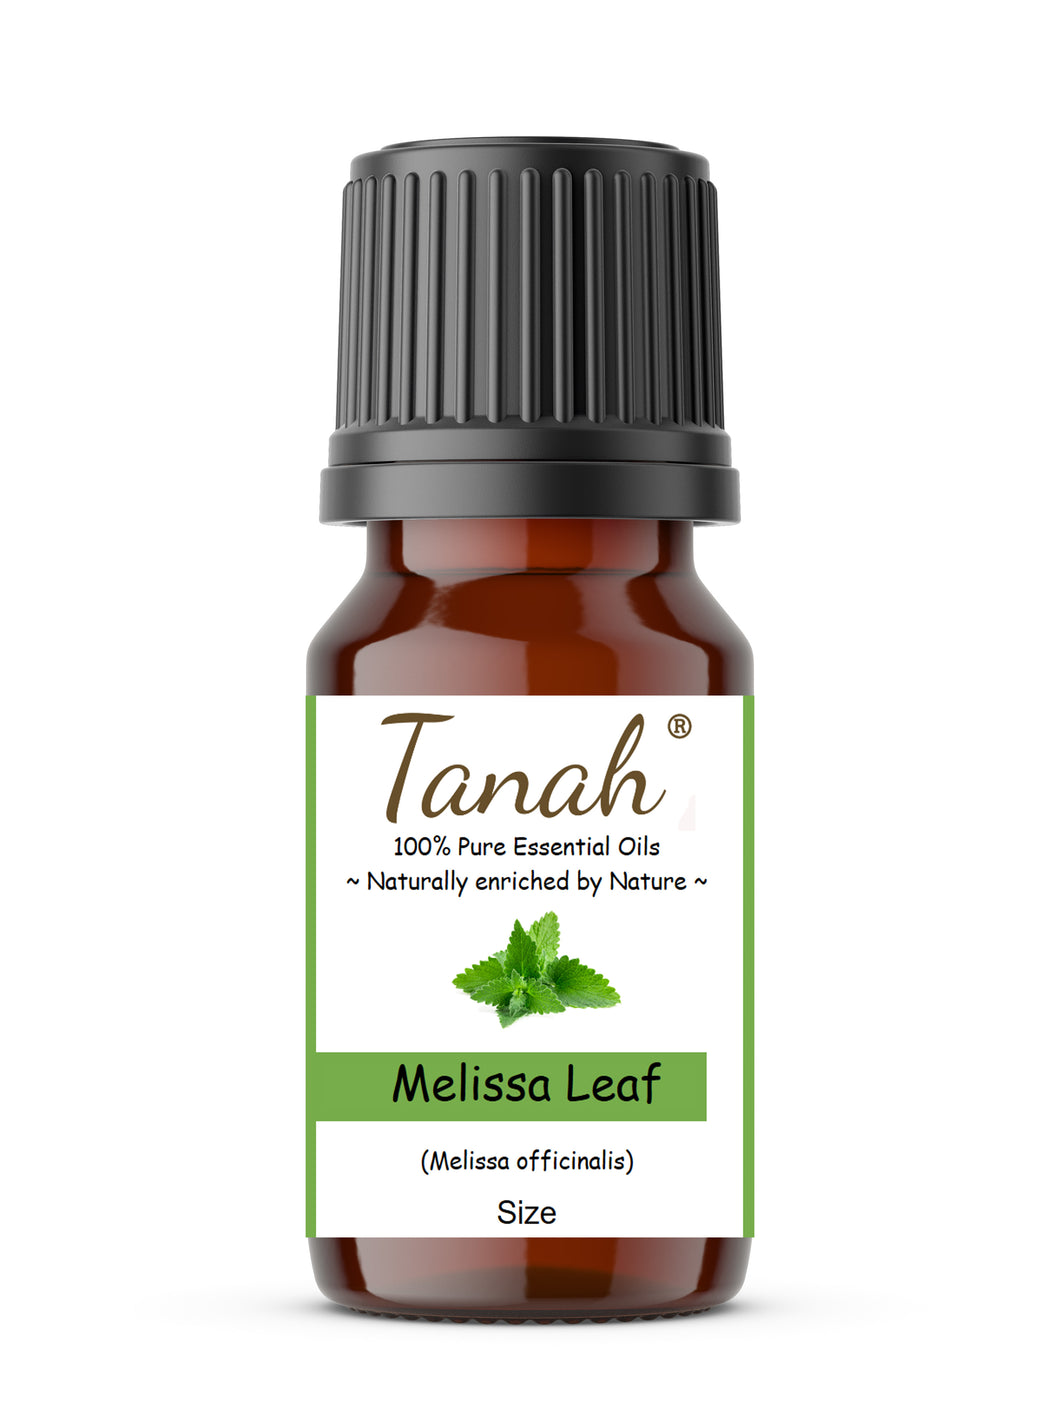 Melissa Leaf (France) essential oil (Melissa officinalis) | Where to buy? Tanah Essential Oil Company | Retail |  Wholesale | Australia